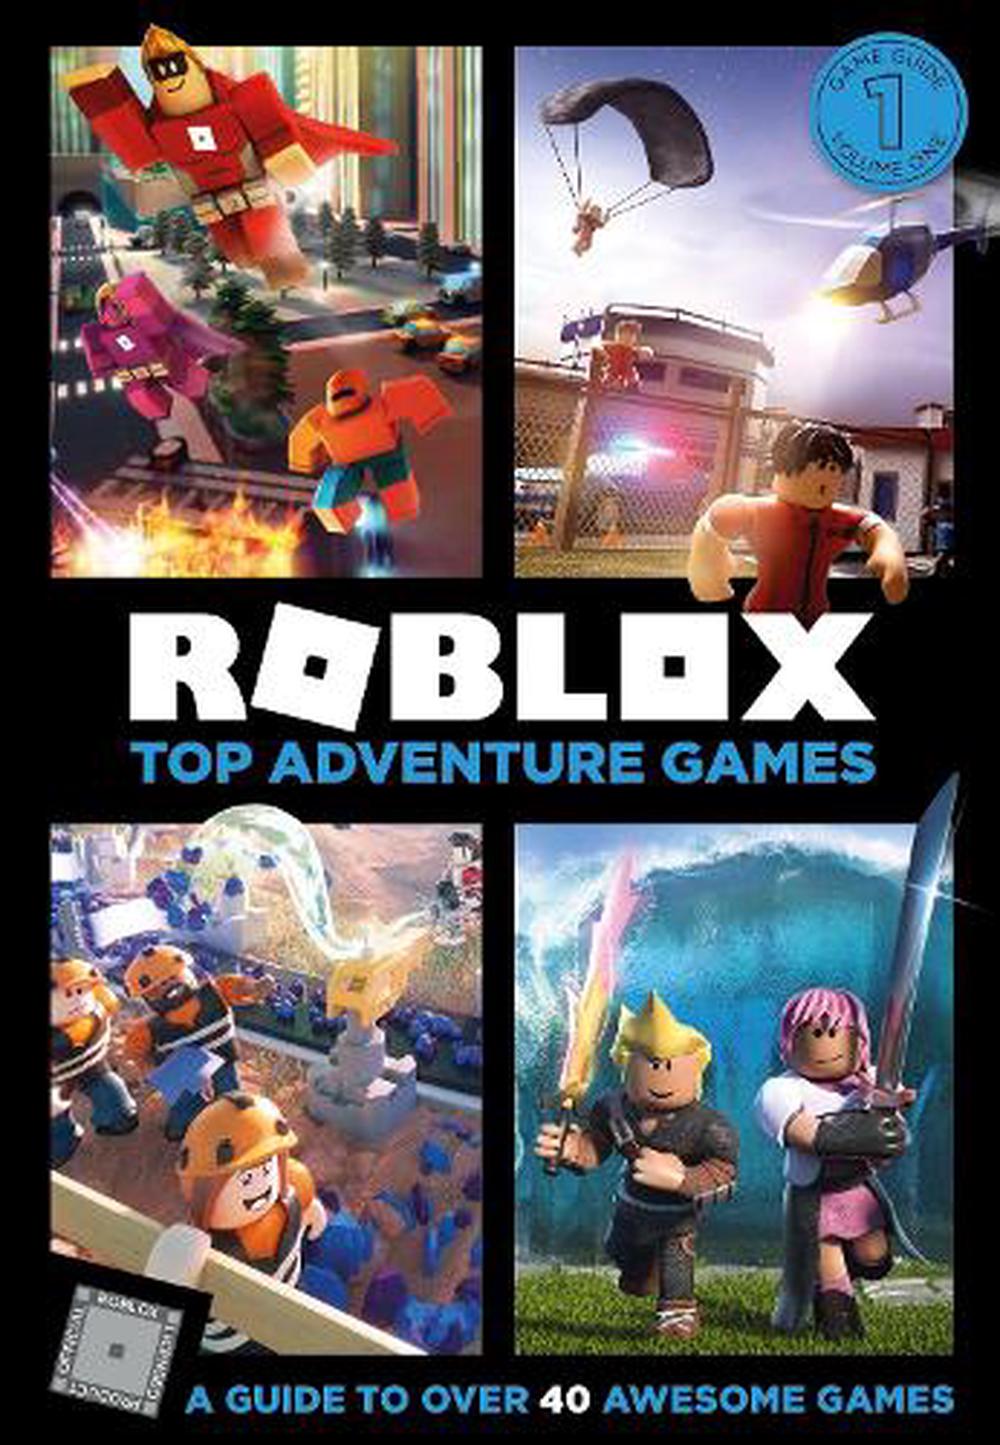 Roblox Top Adventure Games By Egmont Publishing Uk Hardcover 9781405291590 Buy Online At The Nile - roblox tycoon archives cooking learning